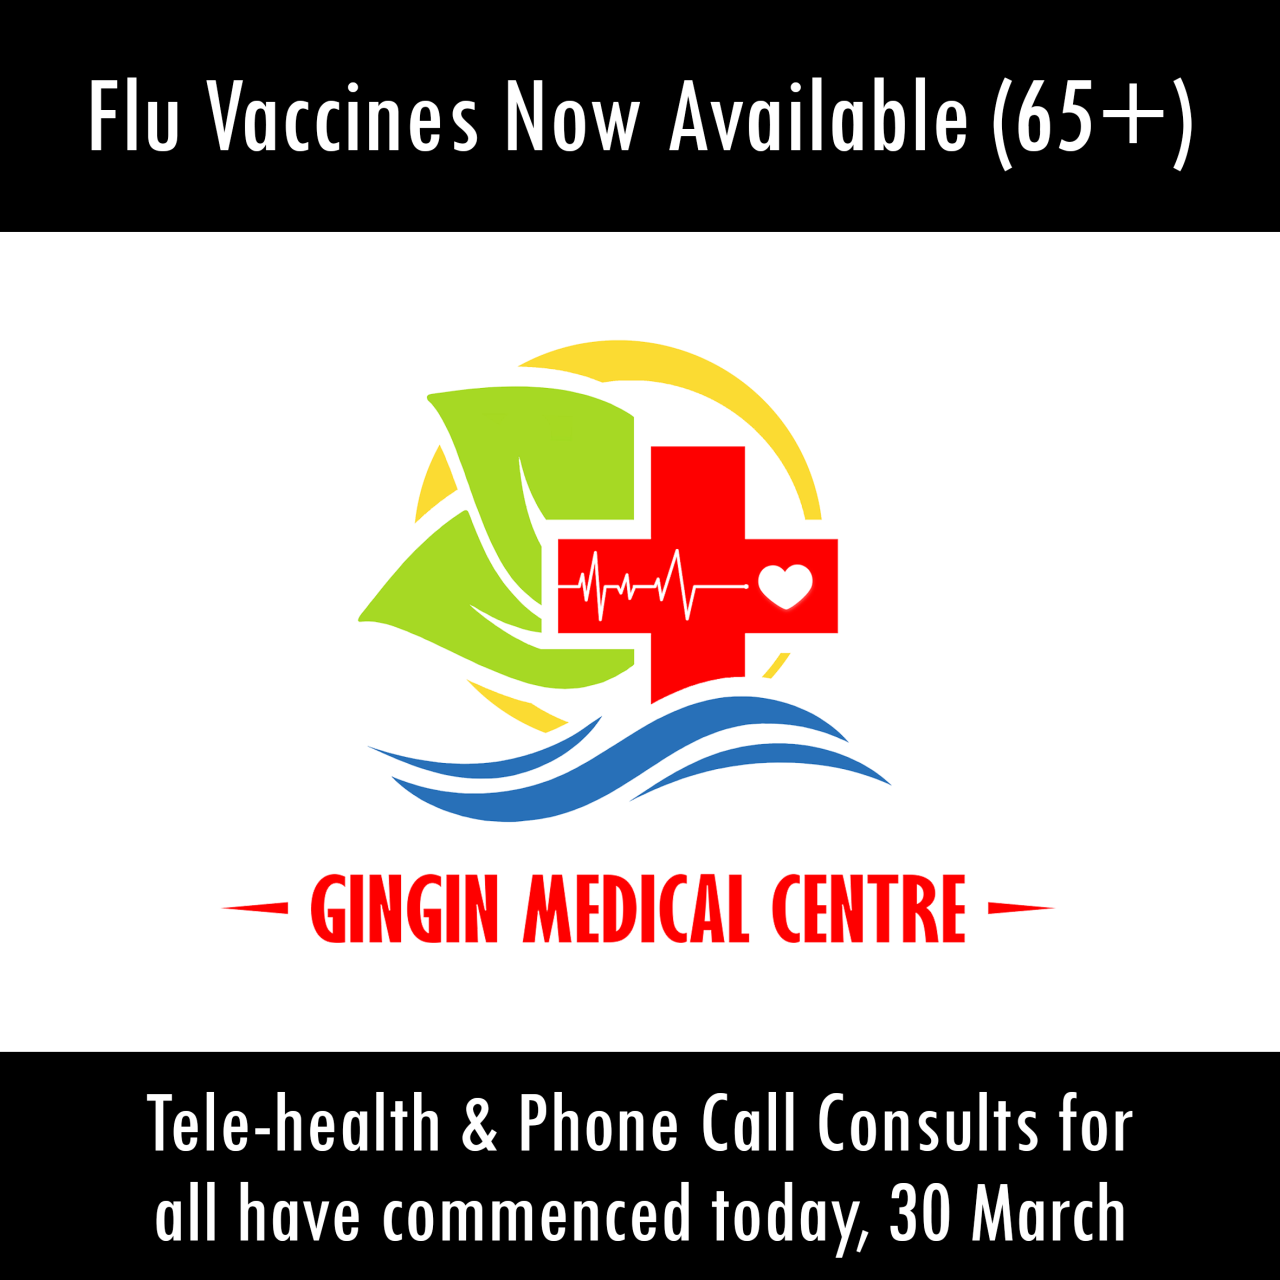 Gingin Medical Centre - Flu Vaccines and Video/Phone Consultations